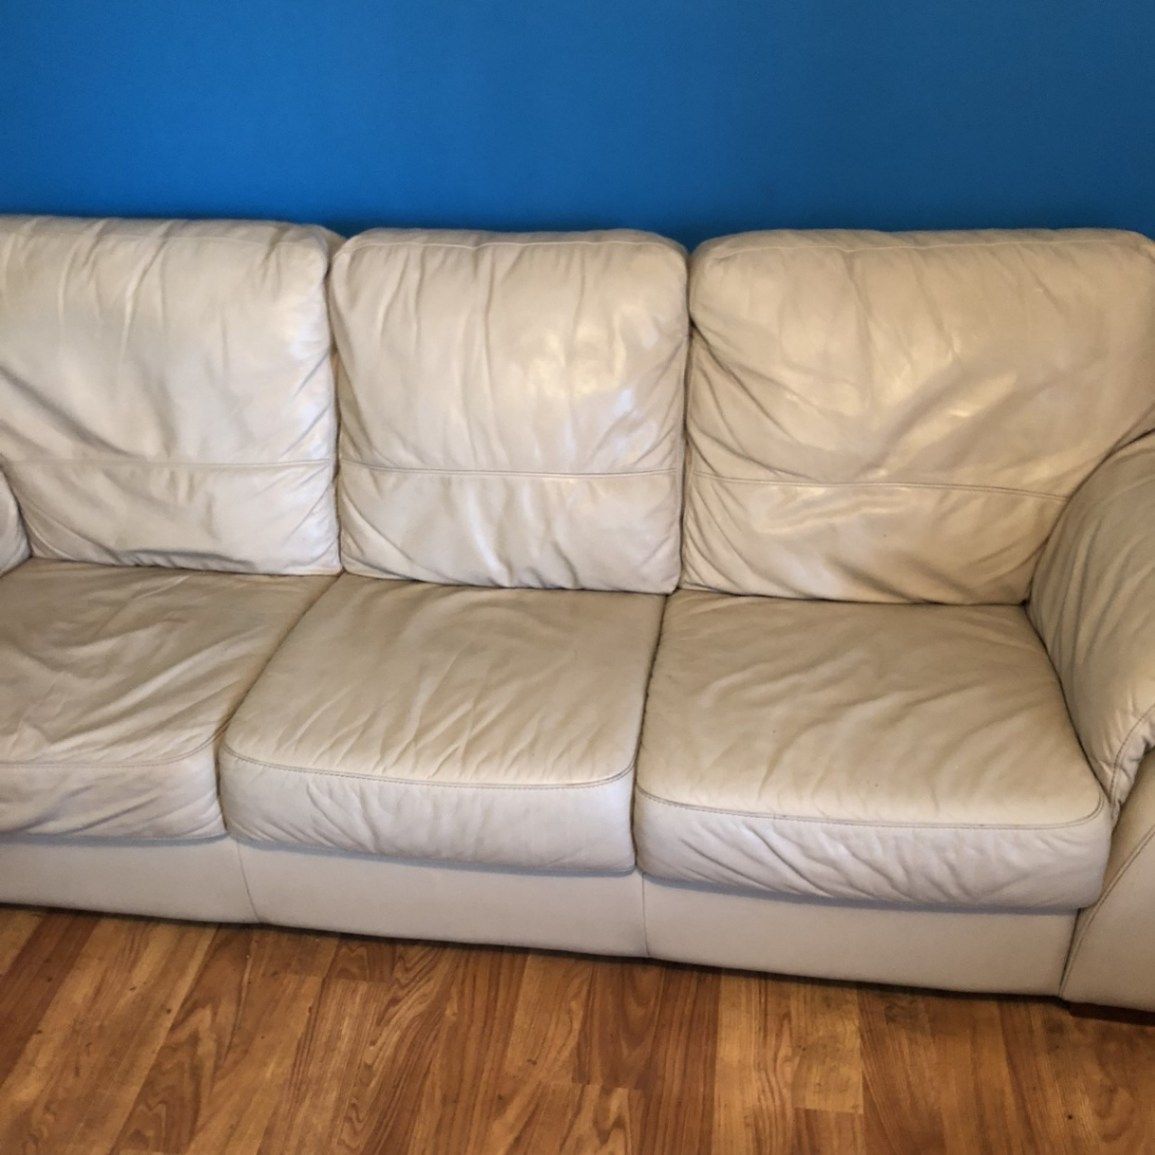 After Leather Couch Cleaning — Carpet Cleaning in Anna Bay, NSW